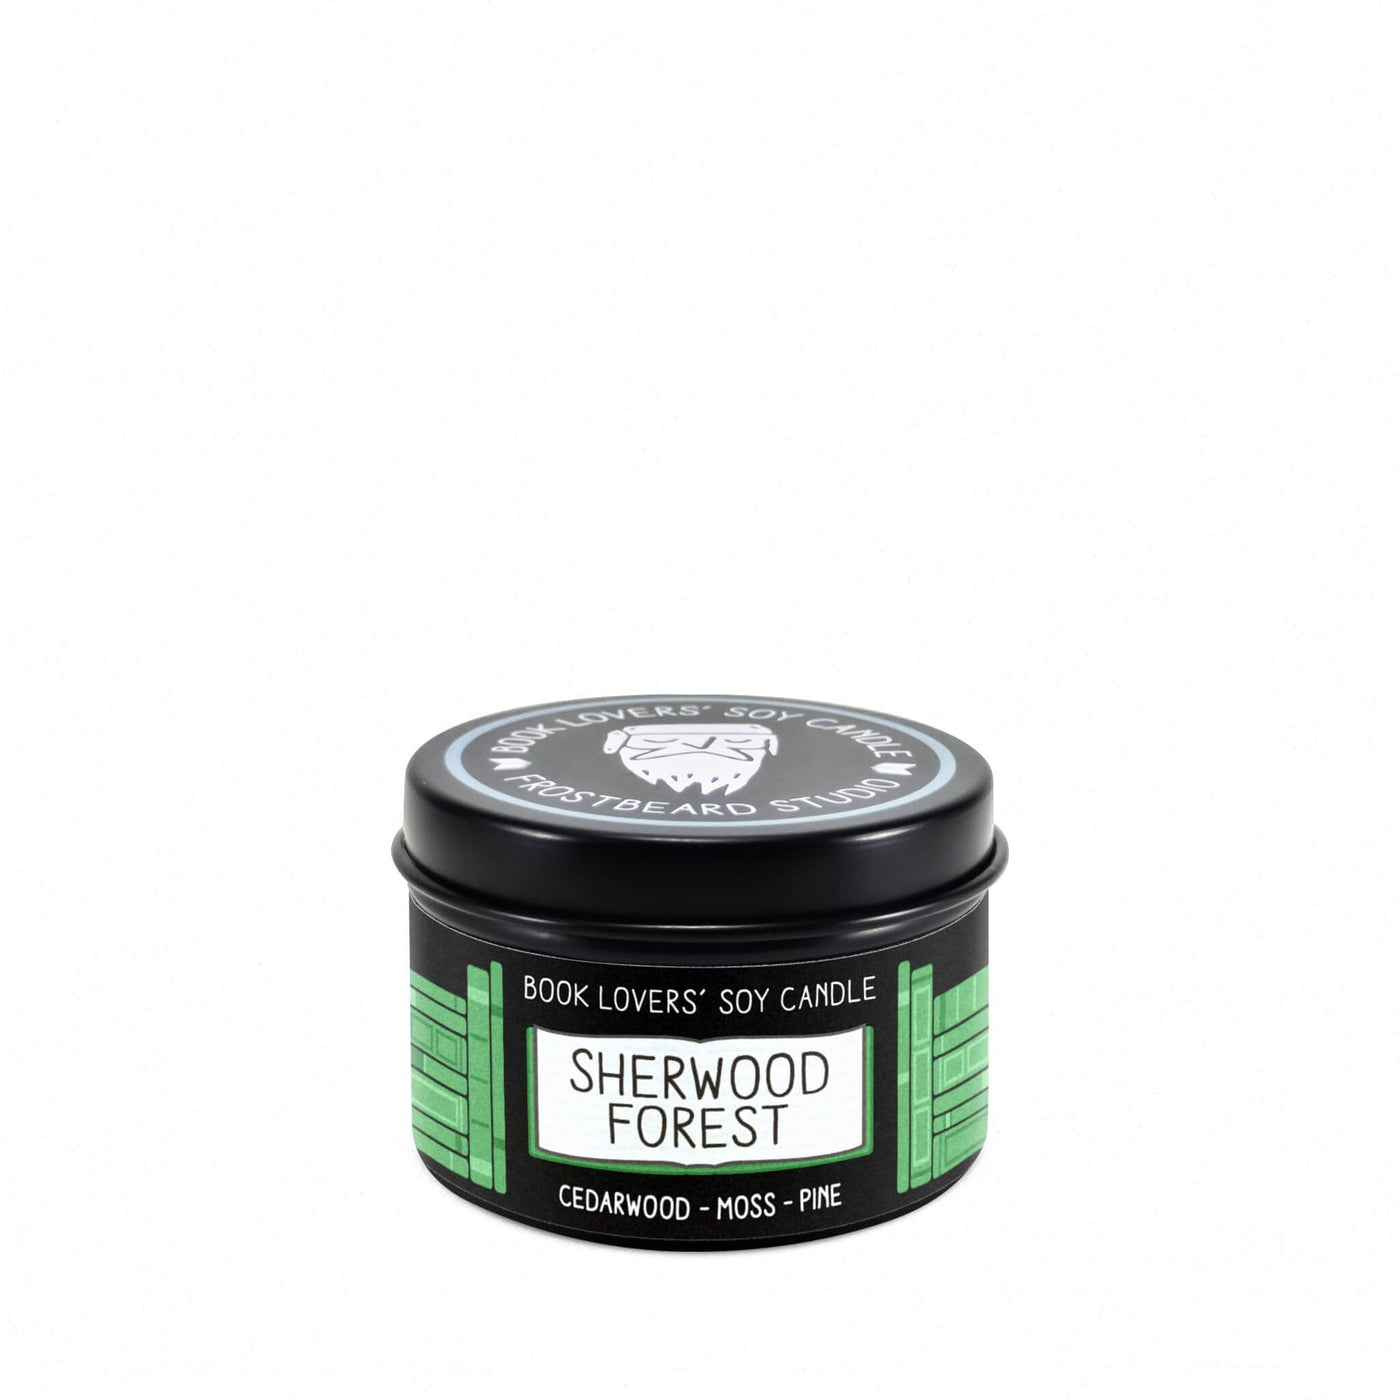 Sherwood Forest - 2 oz Tin - Book Lovers' Soy Candle - Frostbeard Studio